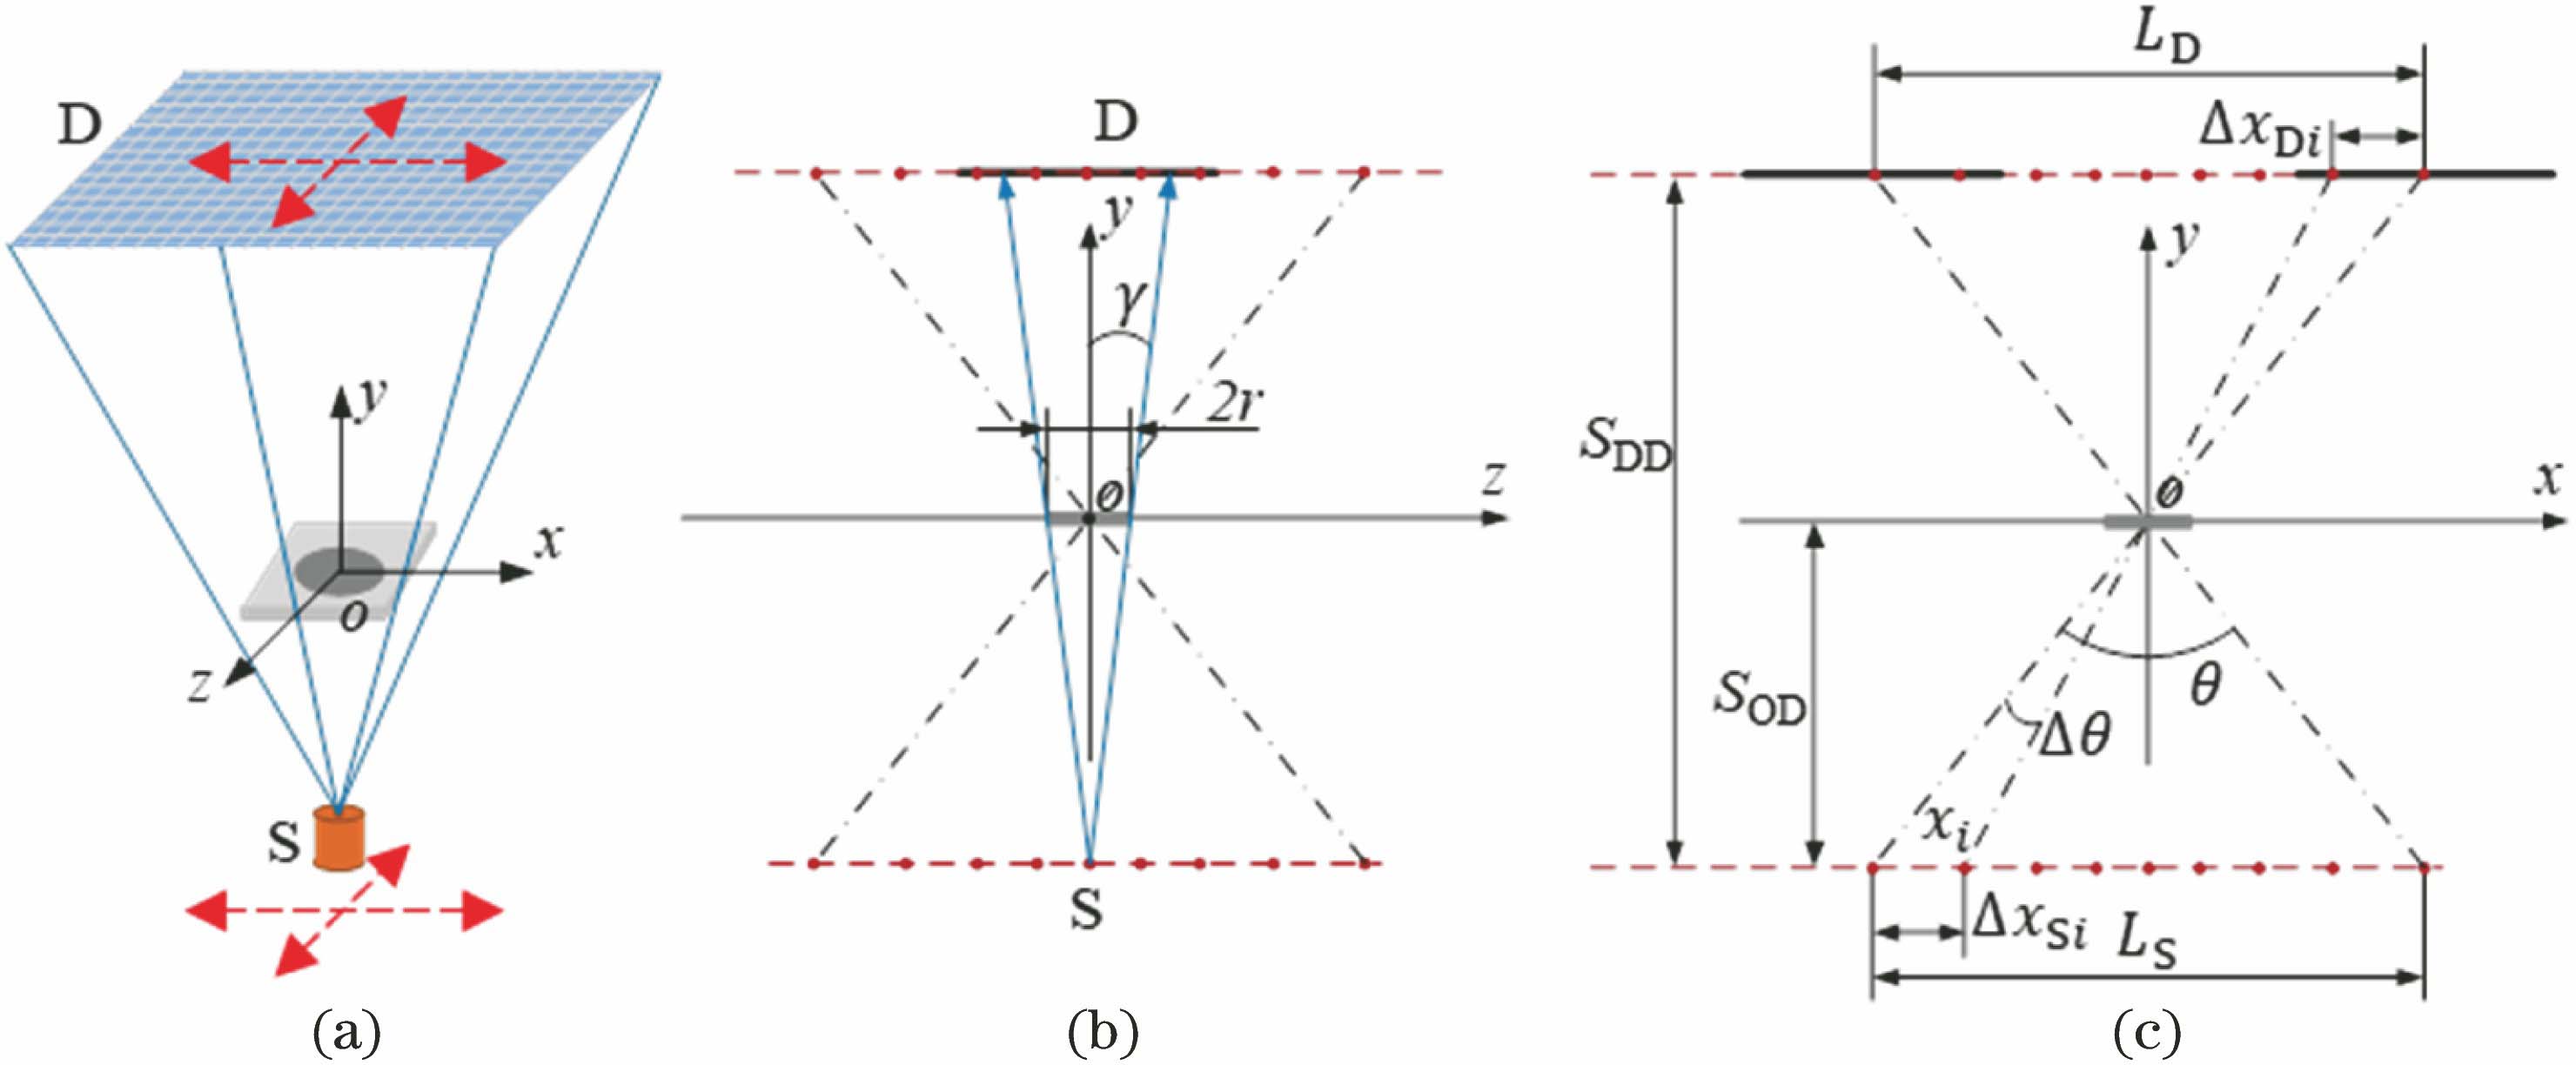 Geometric model of OTCL system. (a) 3D scanning model; (b) scanning model in z direction; (c) scanning model in x direction